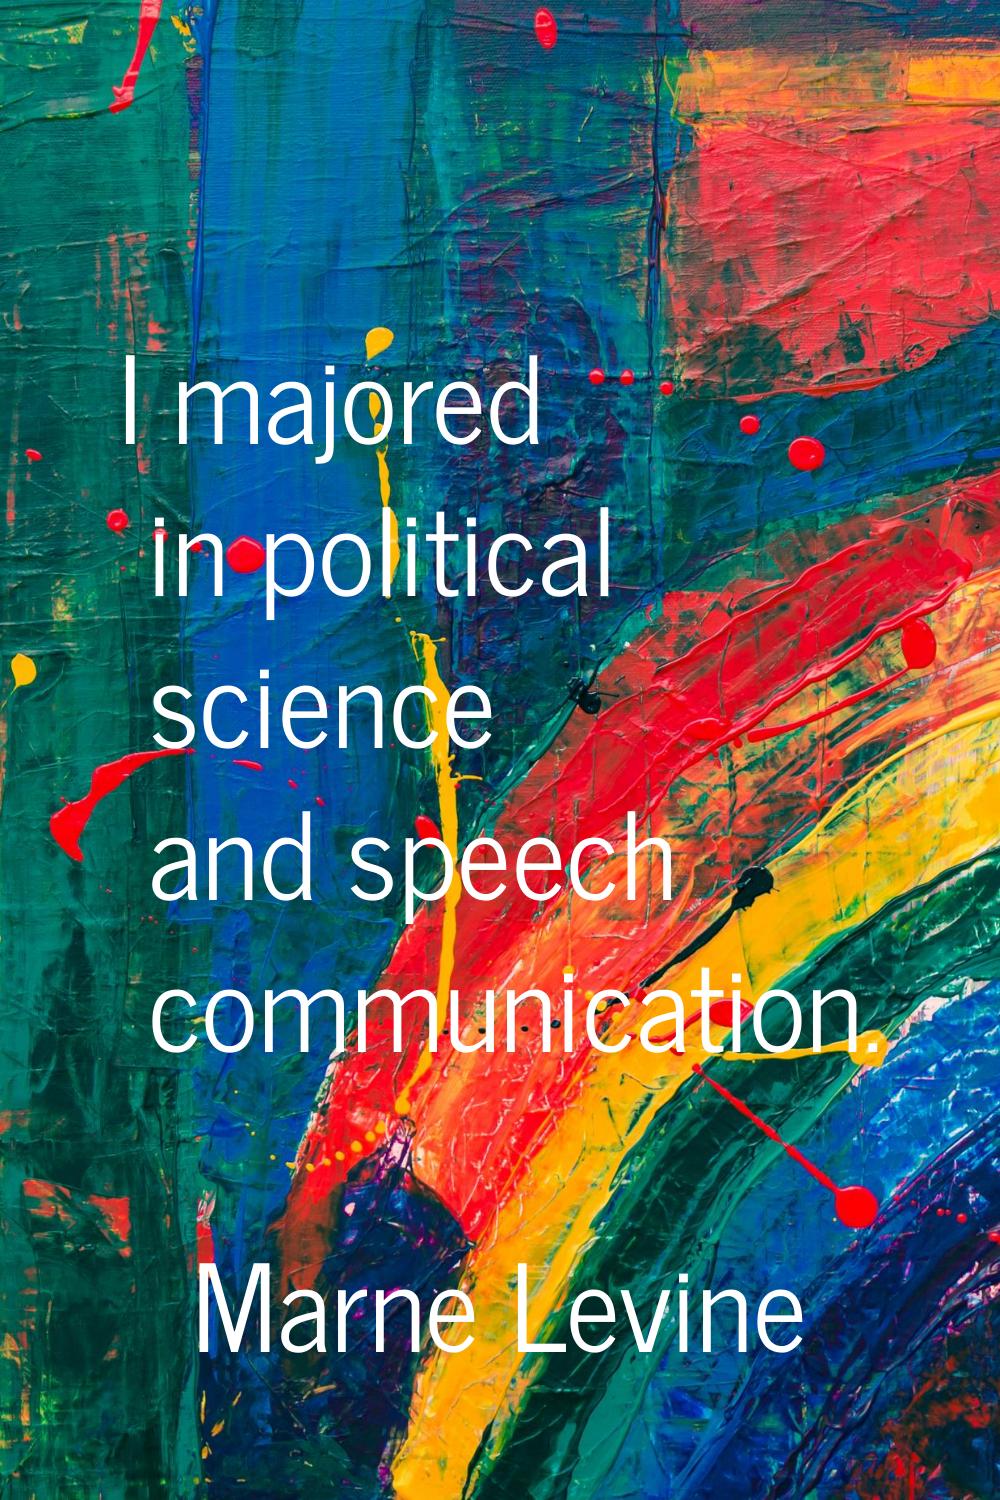 I majored in political science and speech communication.